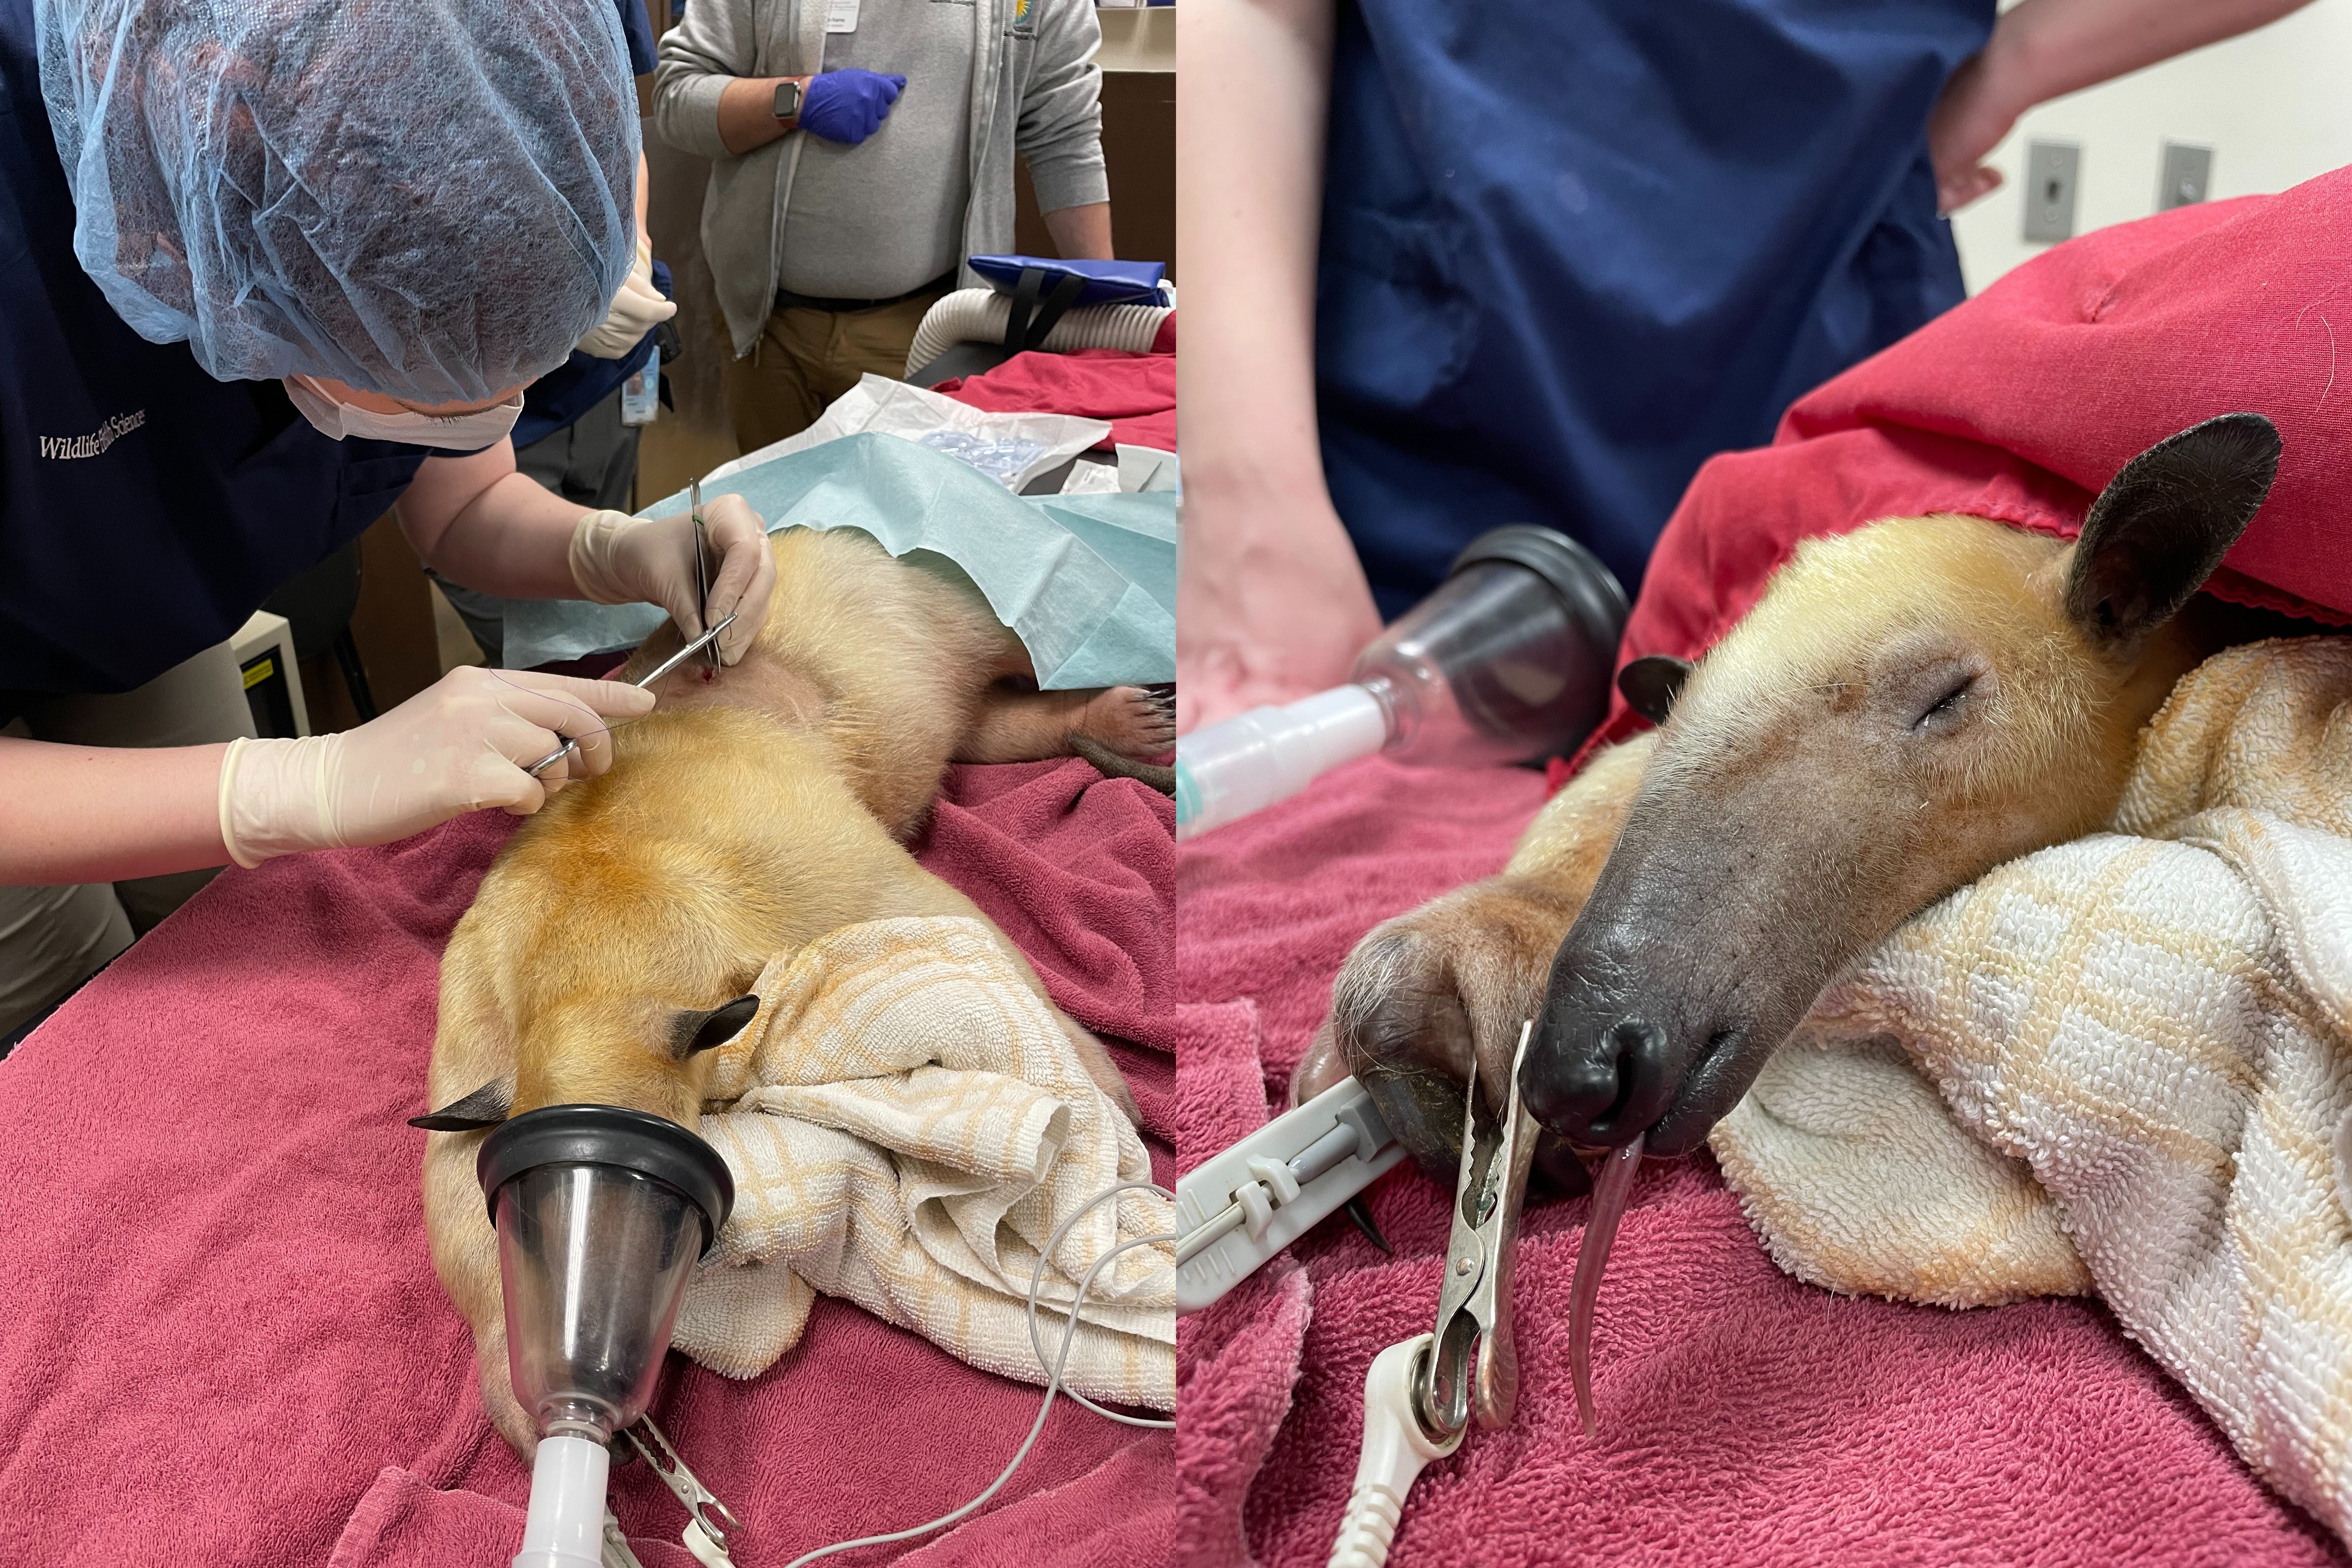 Image displays two photos side by side. The left photo shows a veterinarian sewing closed an incision site on an anteater. The right side of the image is a close up photo of the anteater under anasthesia.